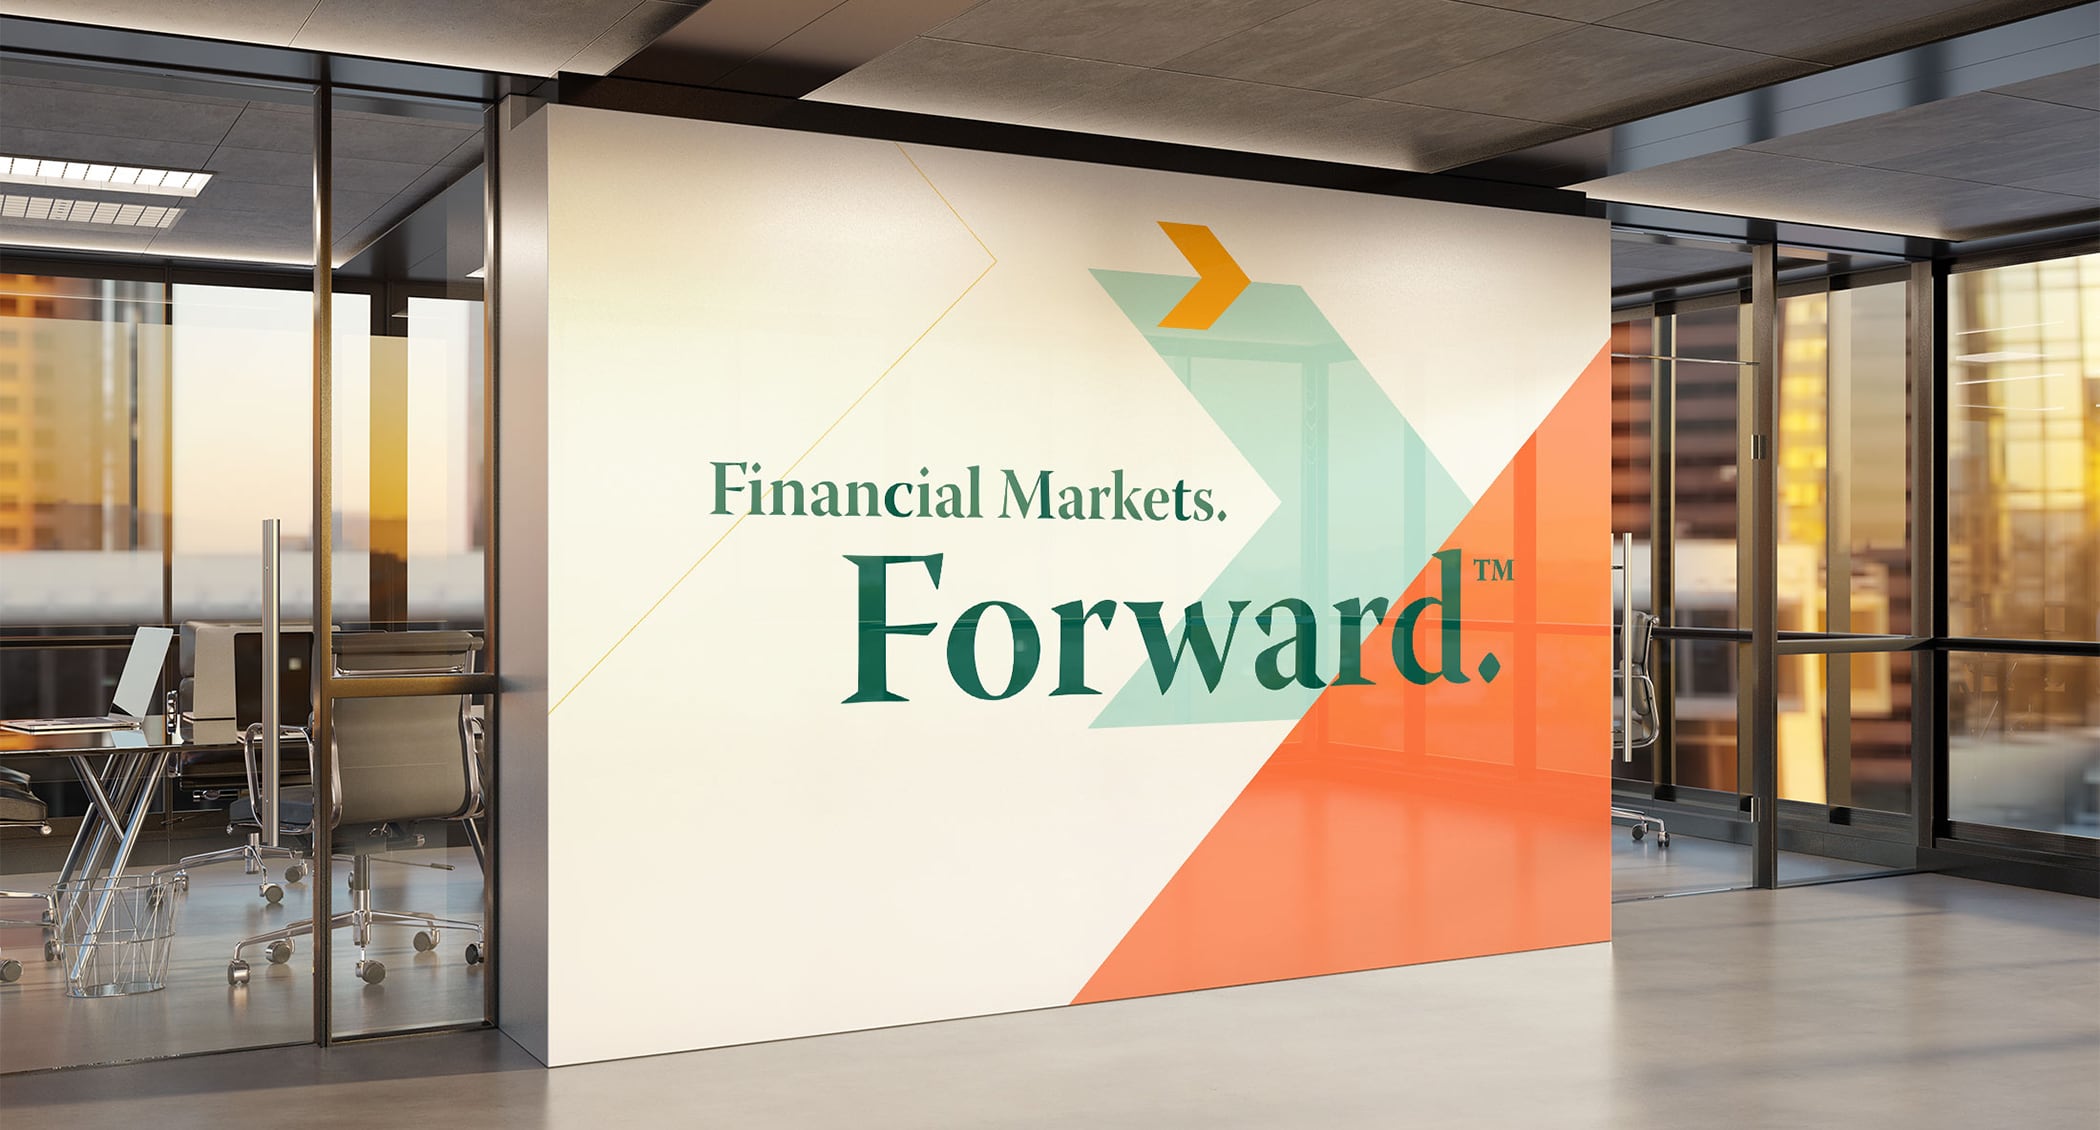 A large wall mural in an office with text that reads Financial Markets. Forward.